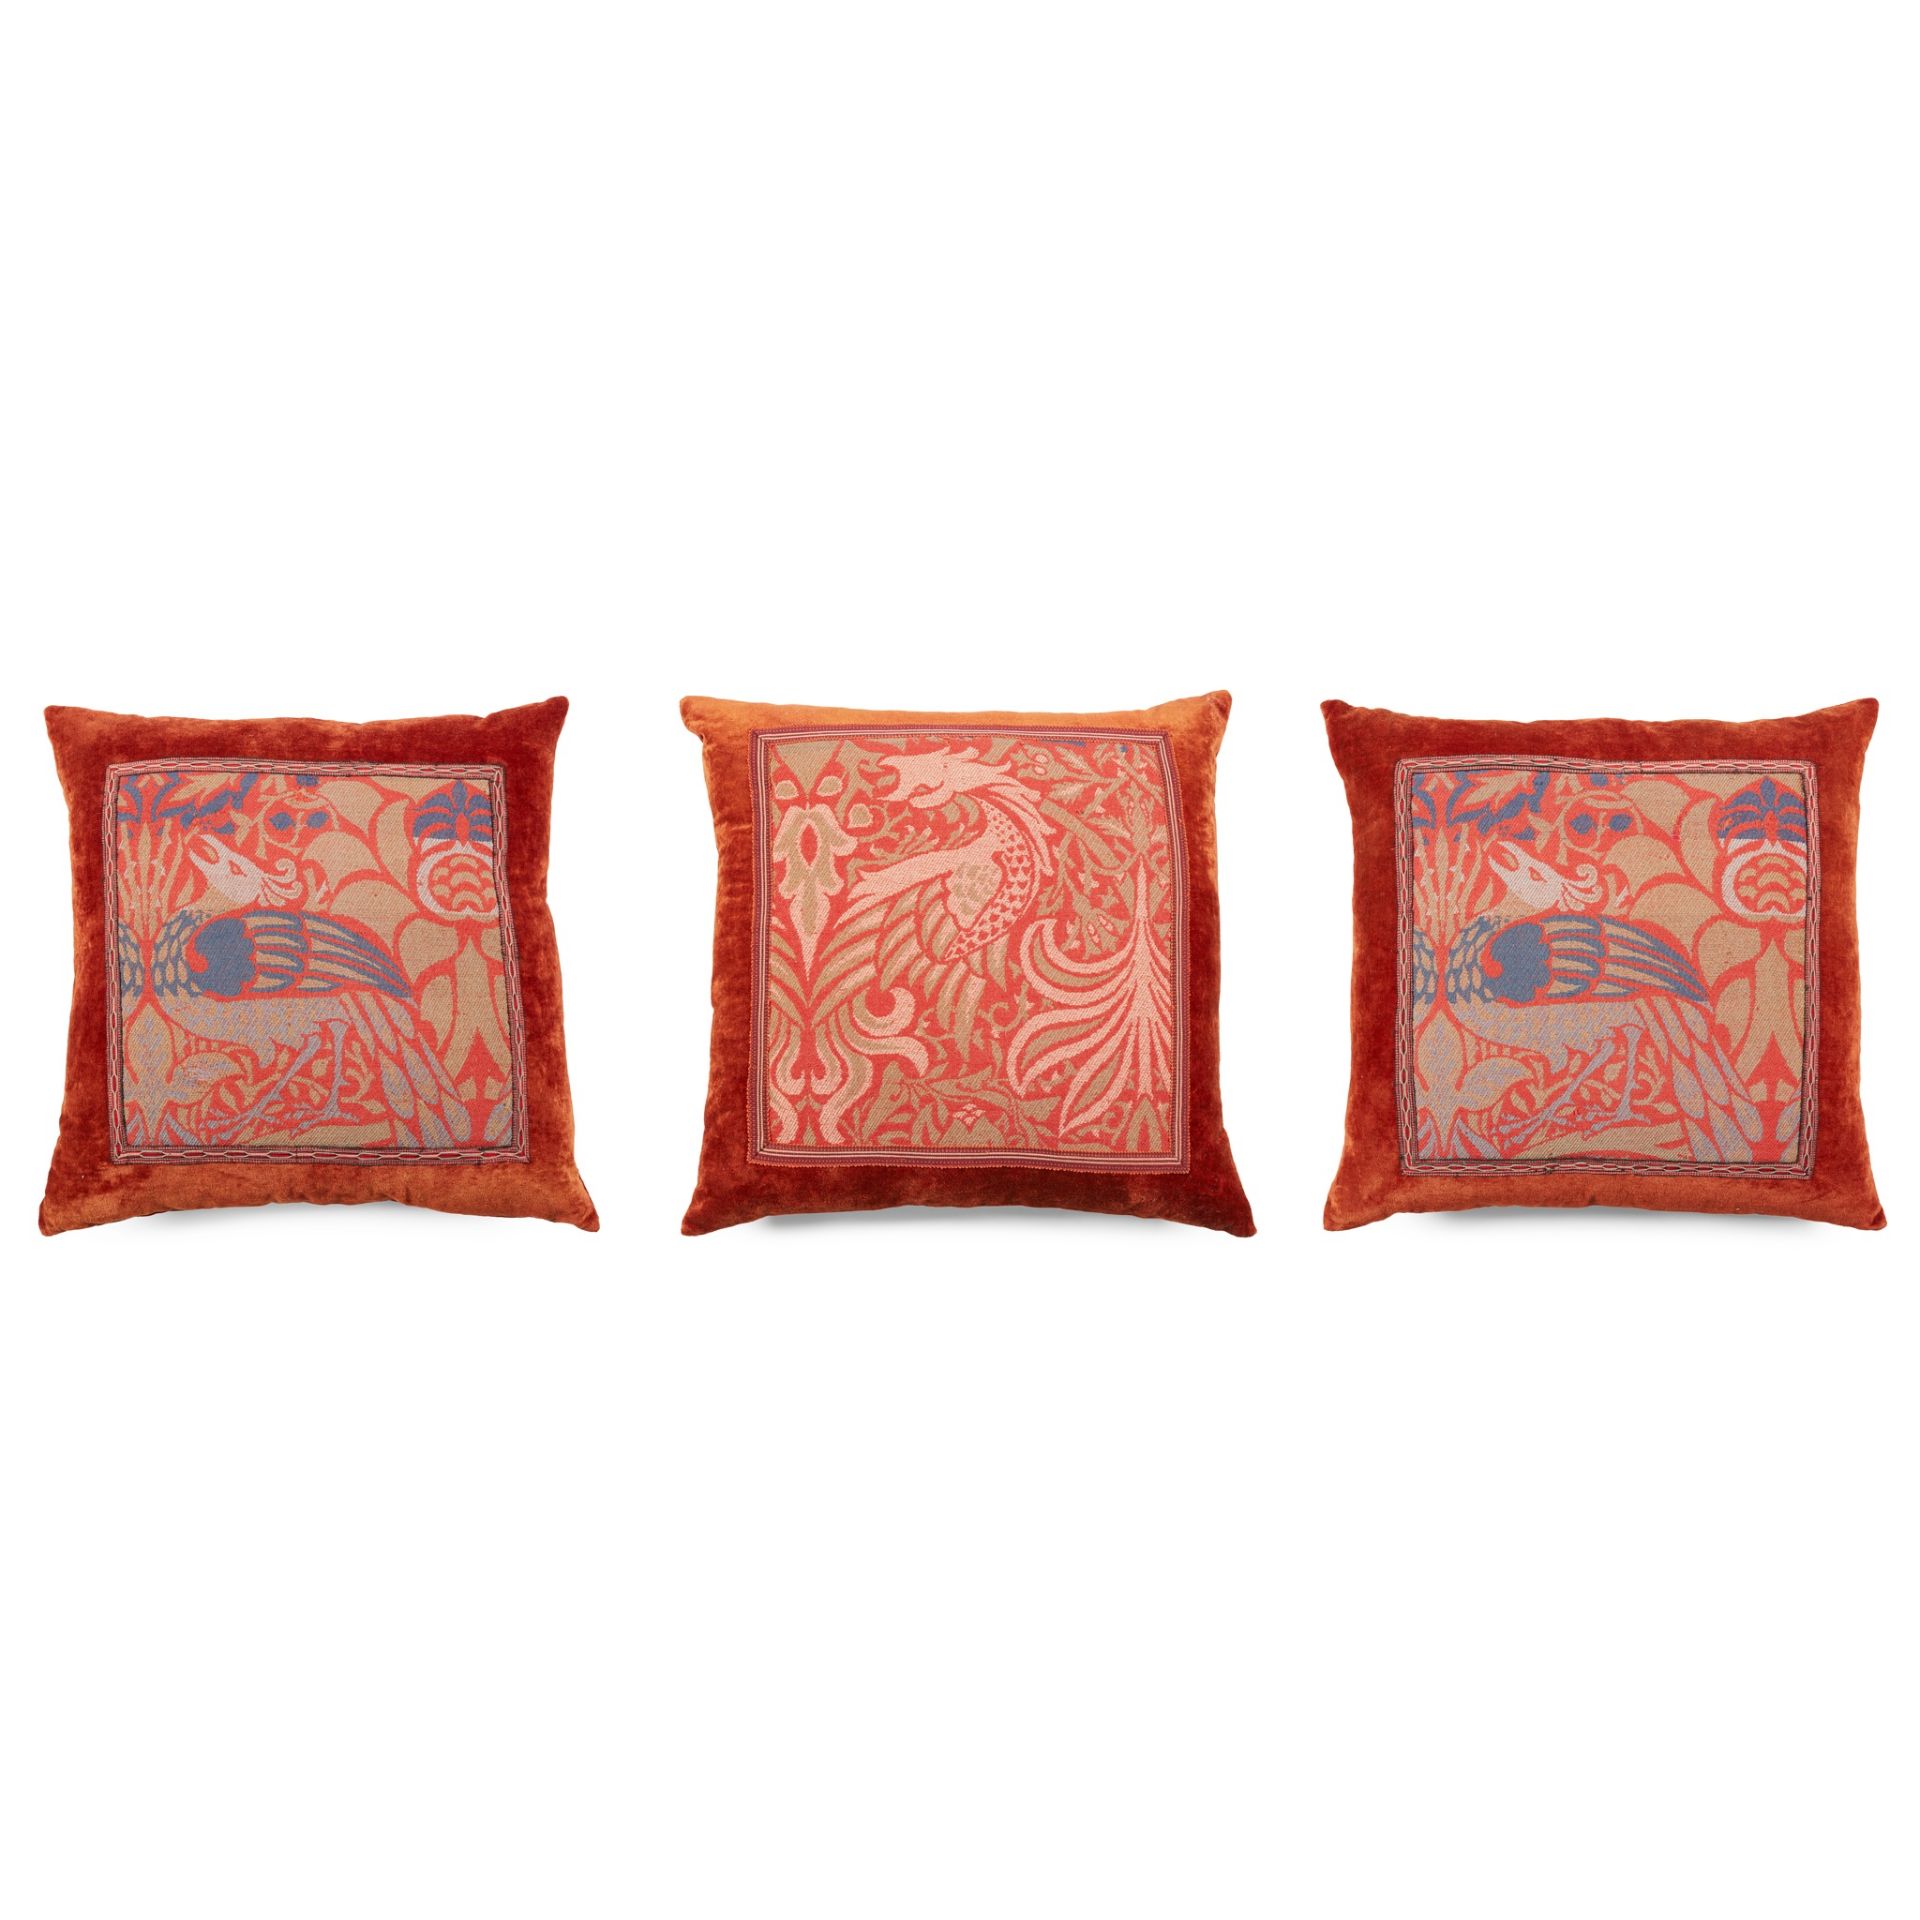 WILLIAM MORRIS (1834-1896) FOR MORRIS & CO. THREE ARTS & CRAFTS ‘PEACOCK & DRAGON’ PATTERN CUSHIONS,